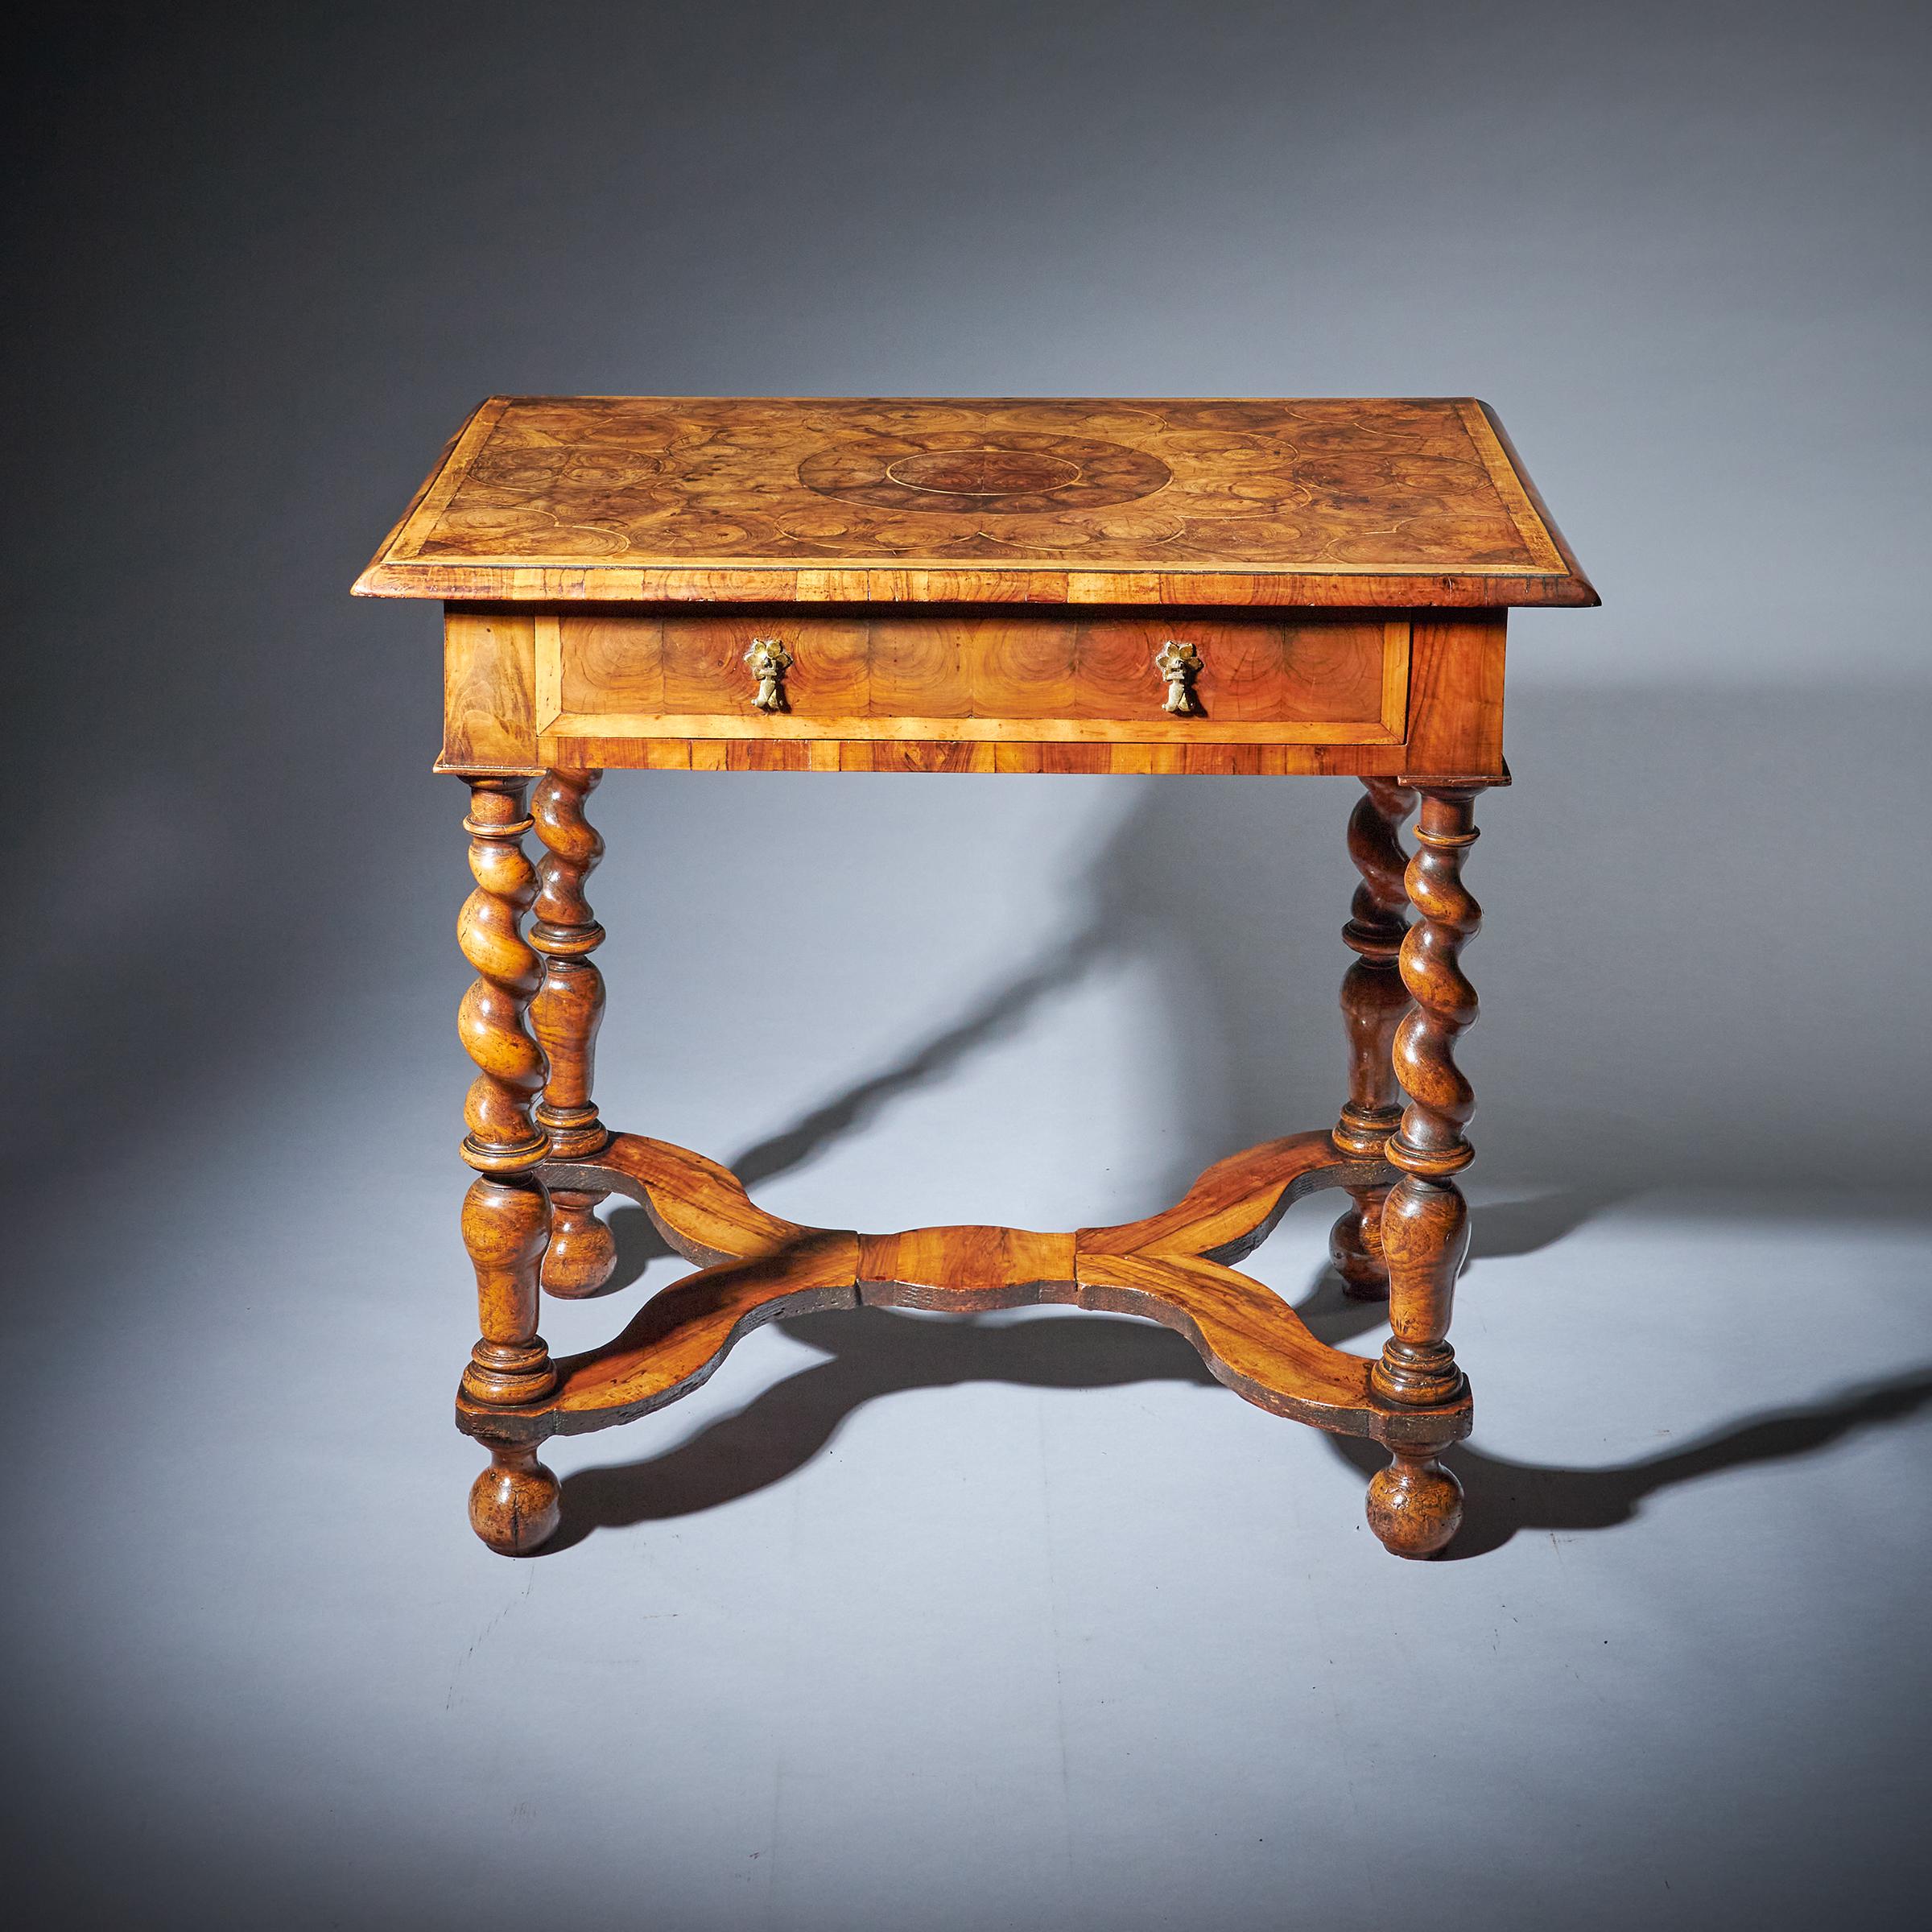 A rare and original 17th century William and Mary olive oyster table, Circa 1680-1700. England 

The ovolo-moulded top is banded in holly and entirely veneered in individually cut oysters of olive laid with thought and precision to create